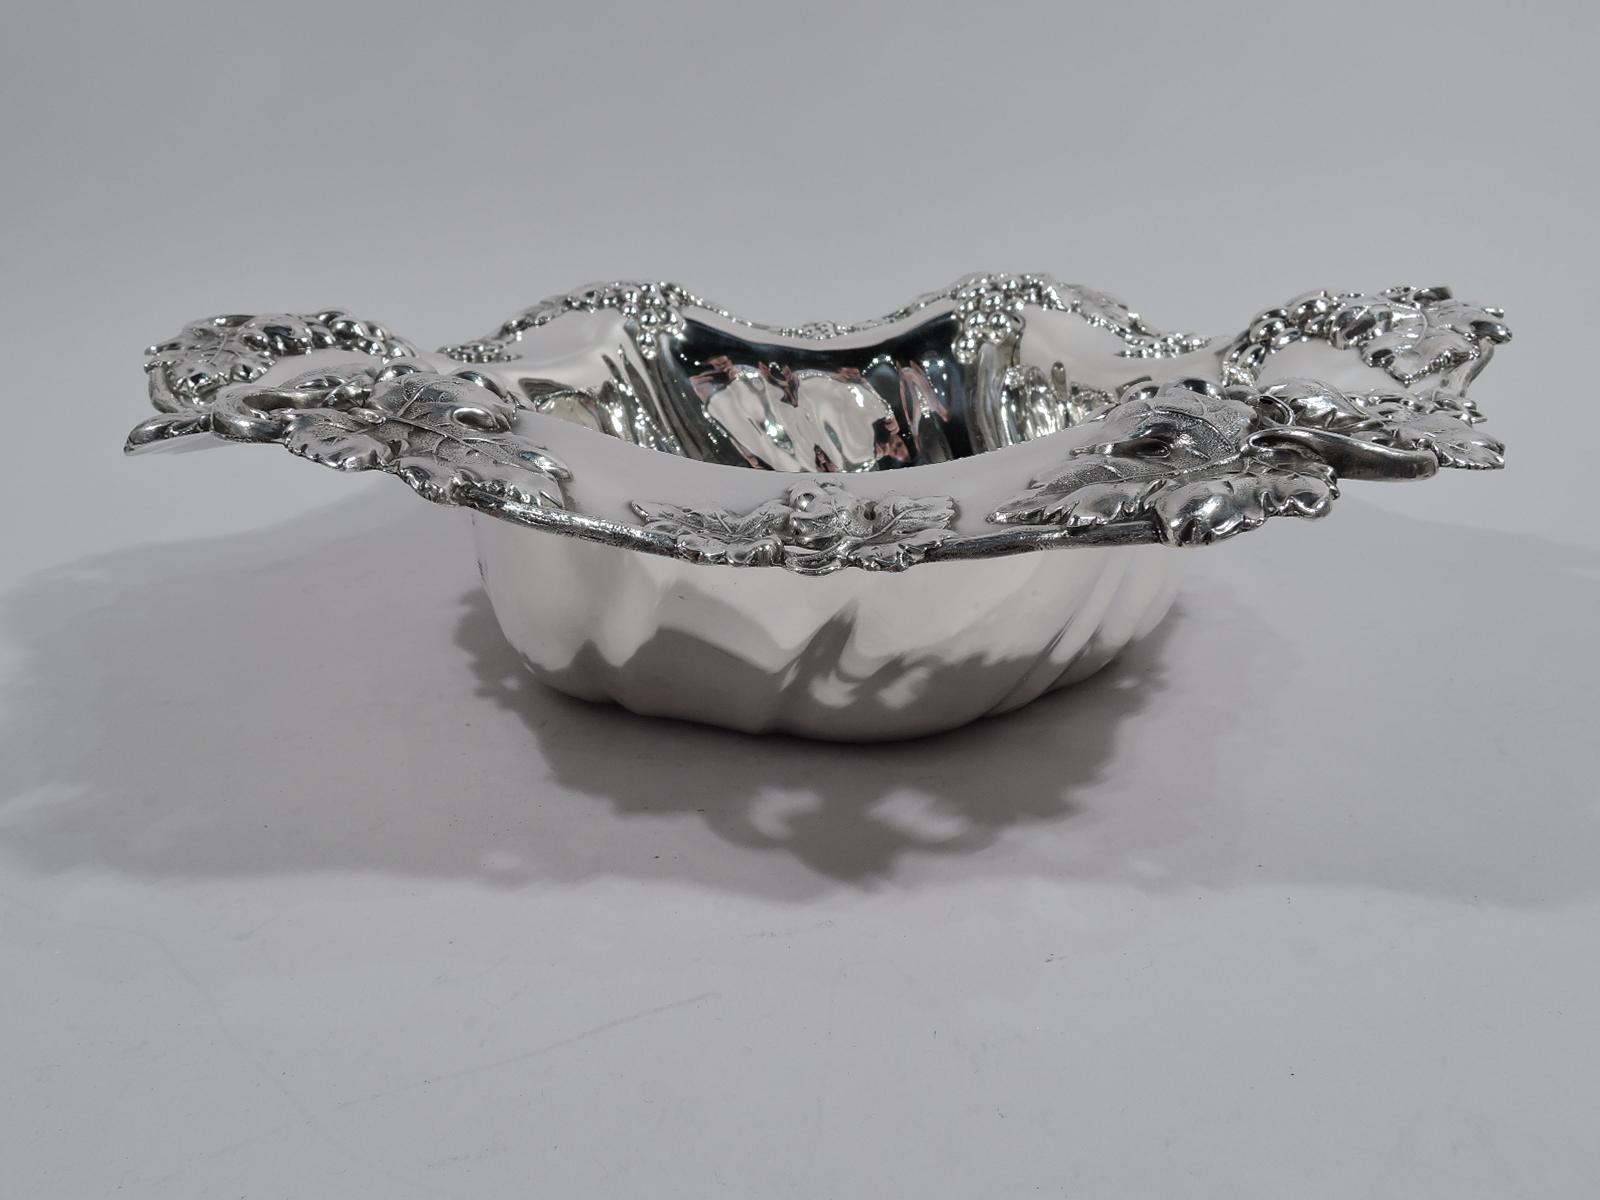 Beautiful sterling silver centerpiece. Made by Mauser in New York, circa 1890. Round well with twisted flutes. Wide and wavy rim with applied and stippled fruiting grapevine; some bunches pendant from open rings. Substantial and tactile as well as